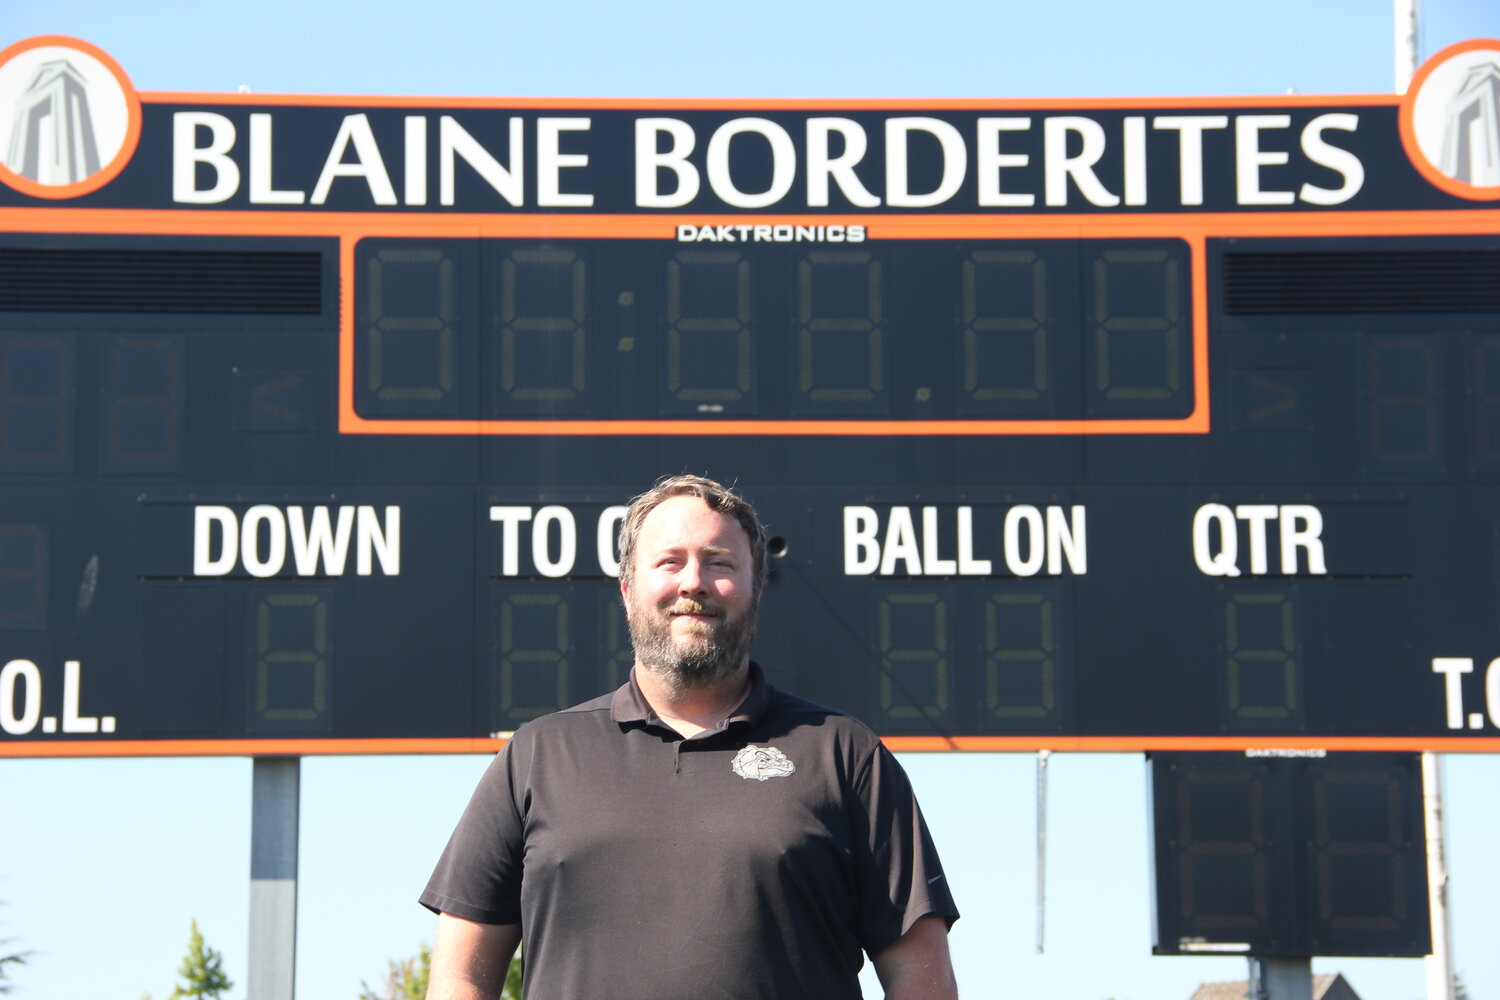 Andy Olson stands in front of Blaine Stadium’s scoreboard during preseason practice. Olson was raised on Whatcom County football, and hopes to grow and bring sustained success to the Borderite program.